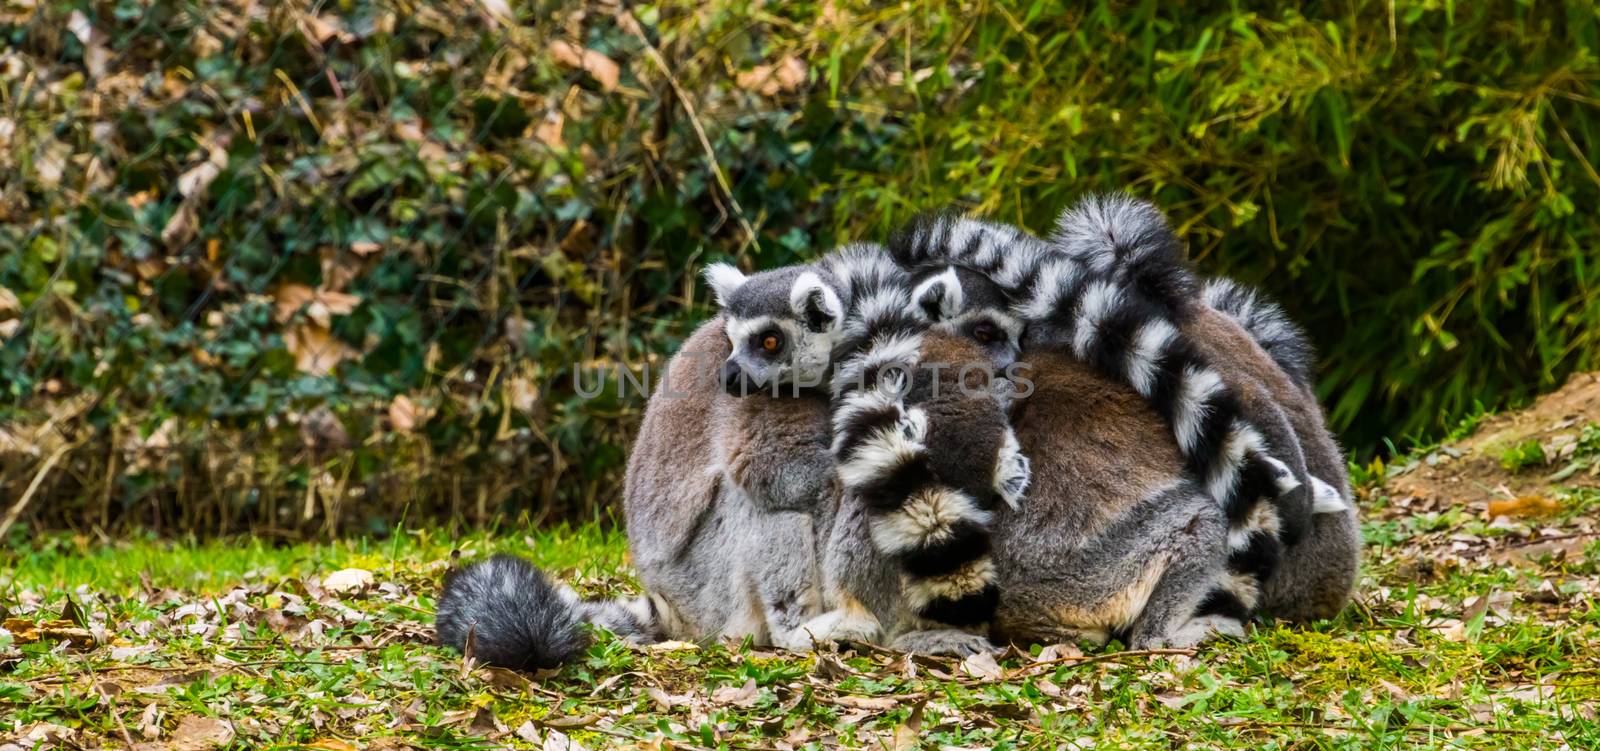 close group of ring tailed lemur monkeys hugging each other, funny and adorable animal behavior by charlottebleijenberg